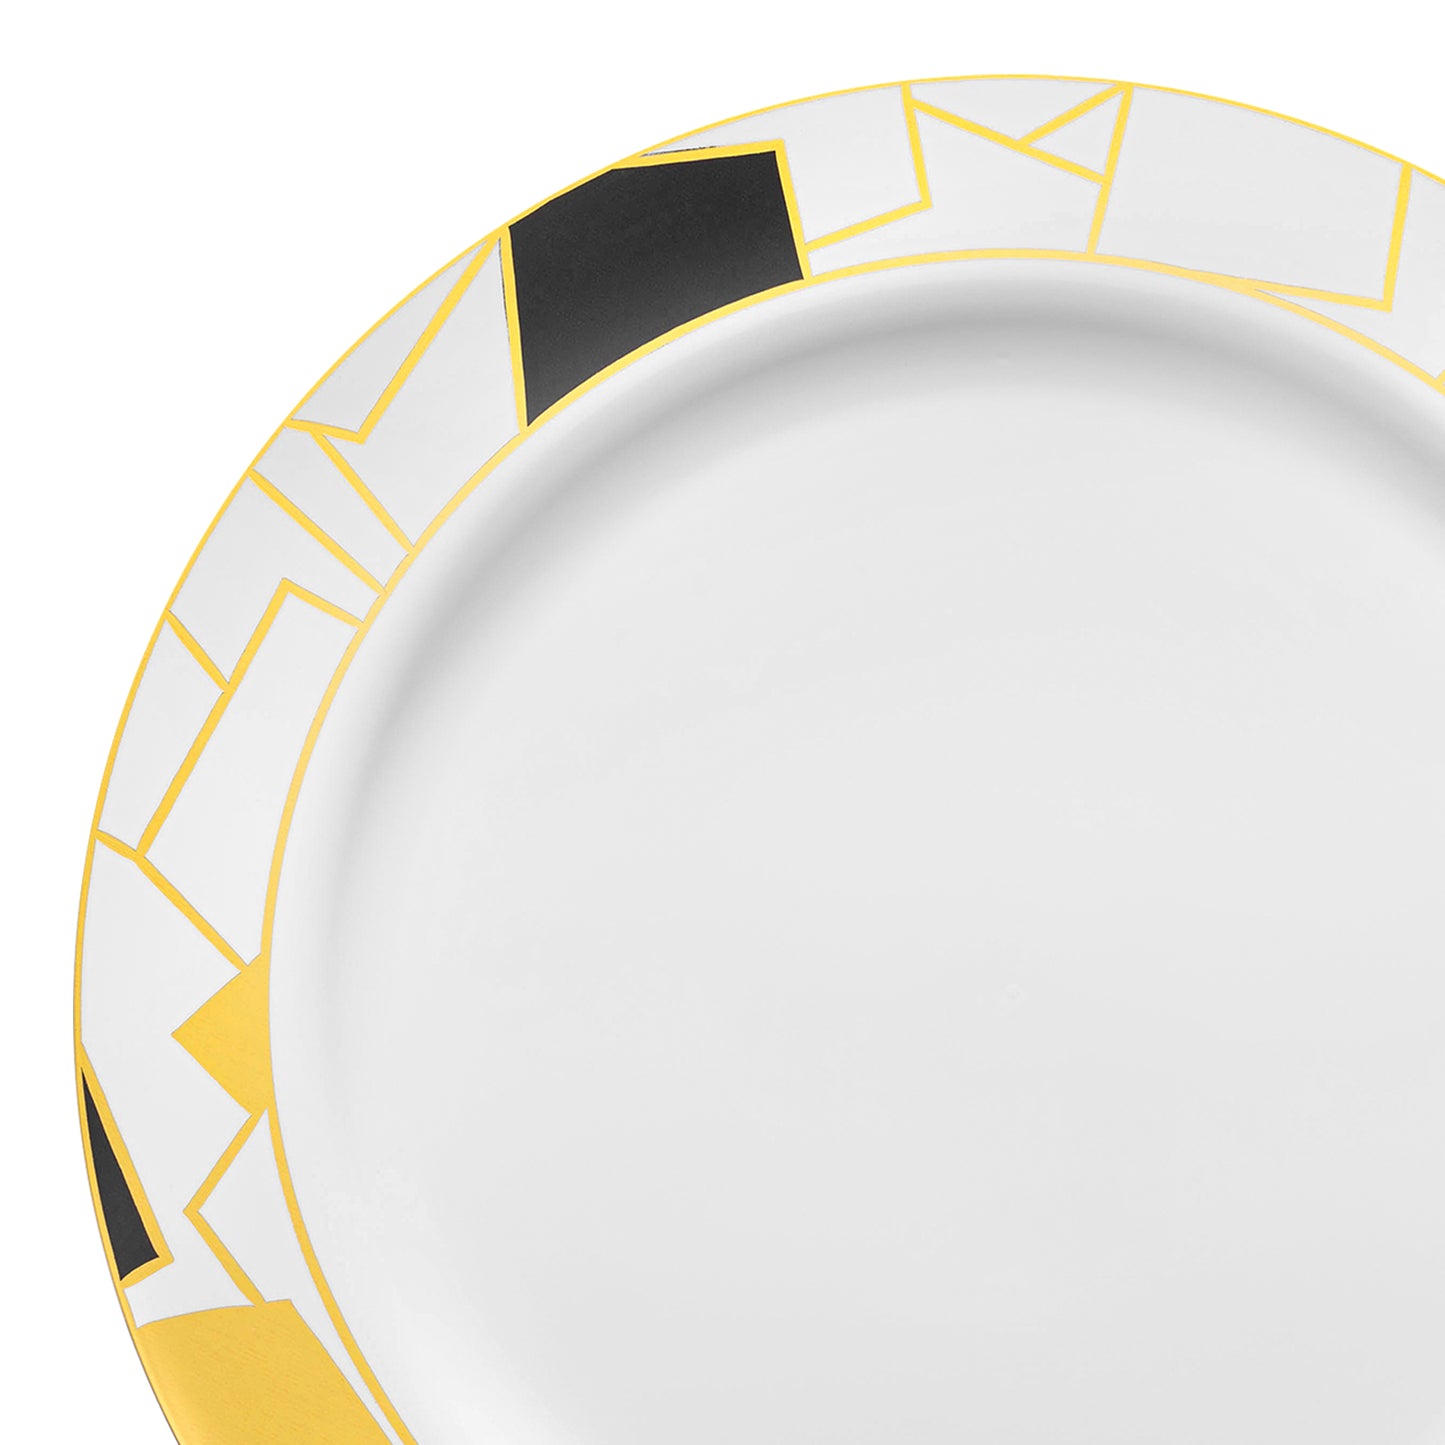 White with Black and Gold Abstract Squares Pattern Round Disposable Plastic Appetizer/Salad Plates (7.5") | The Kaya Collection